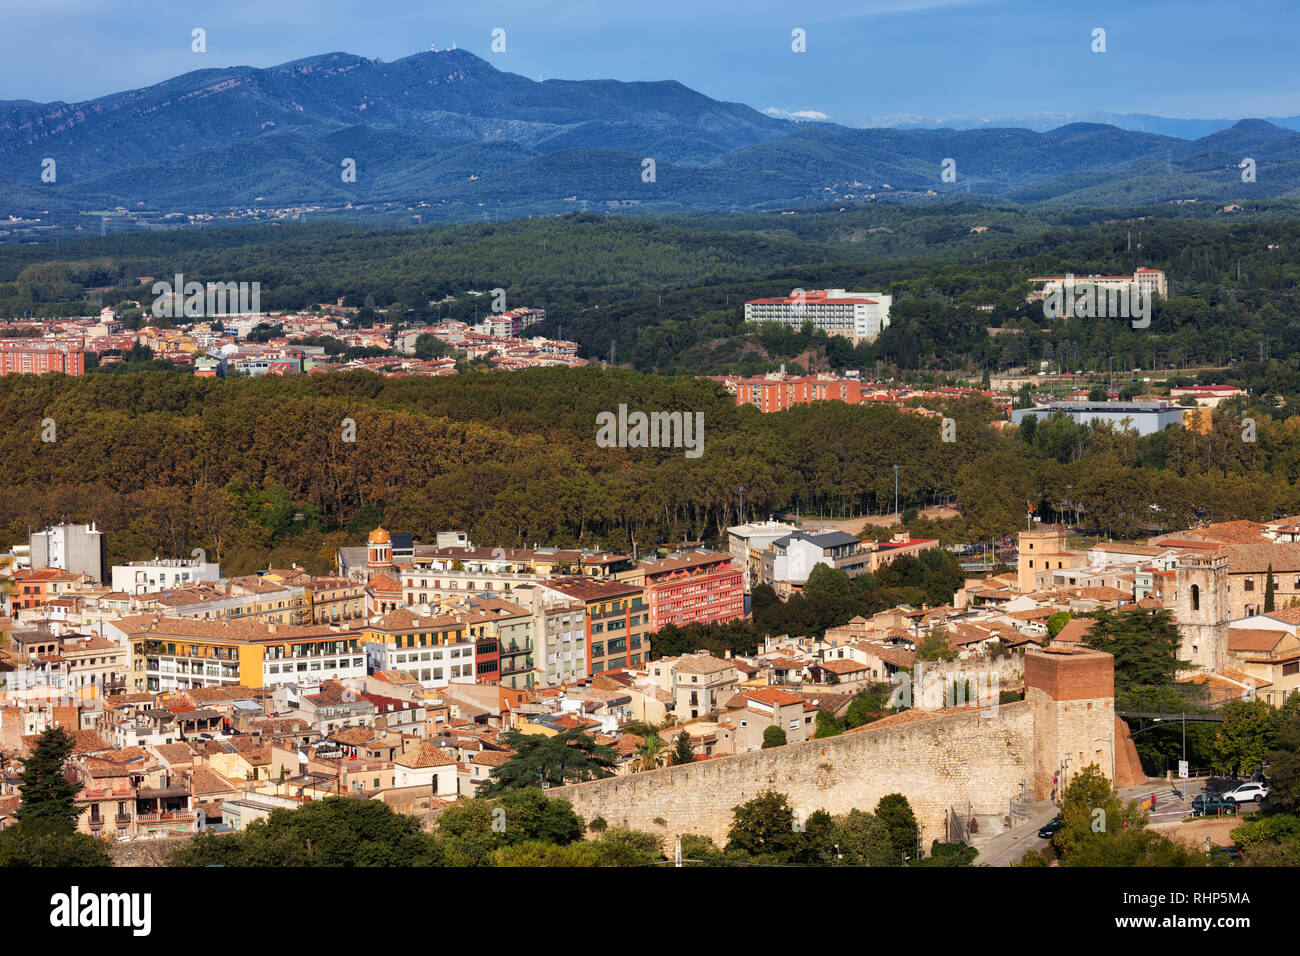 Girona city and province landscape in Catalonia region of Spain. Stock Photo